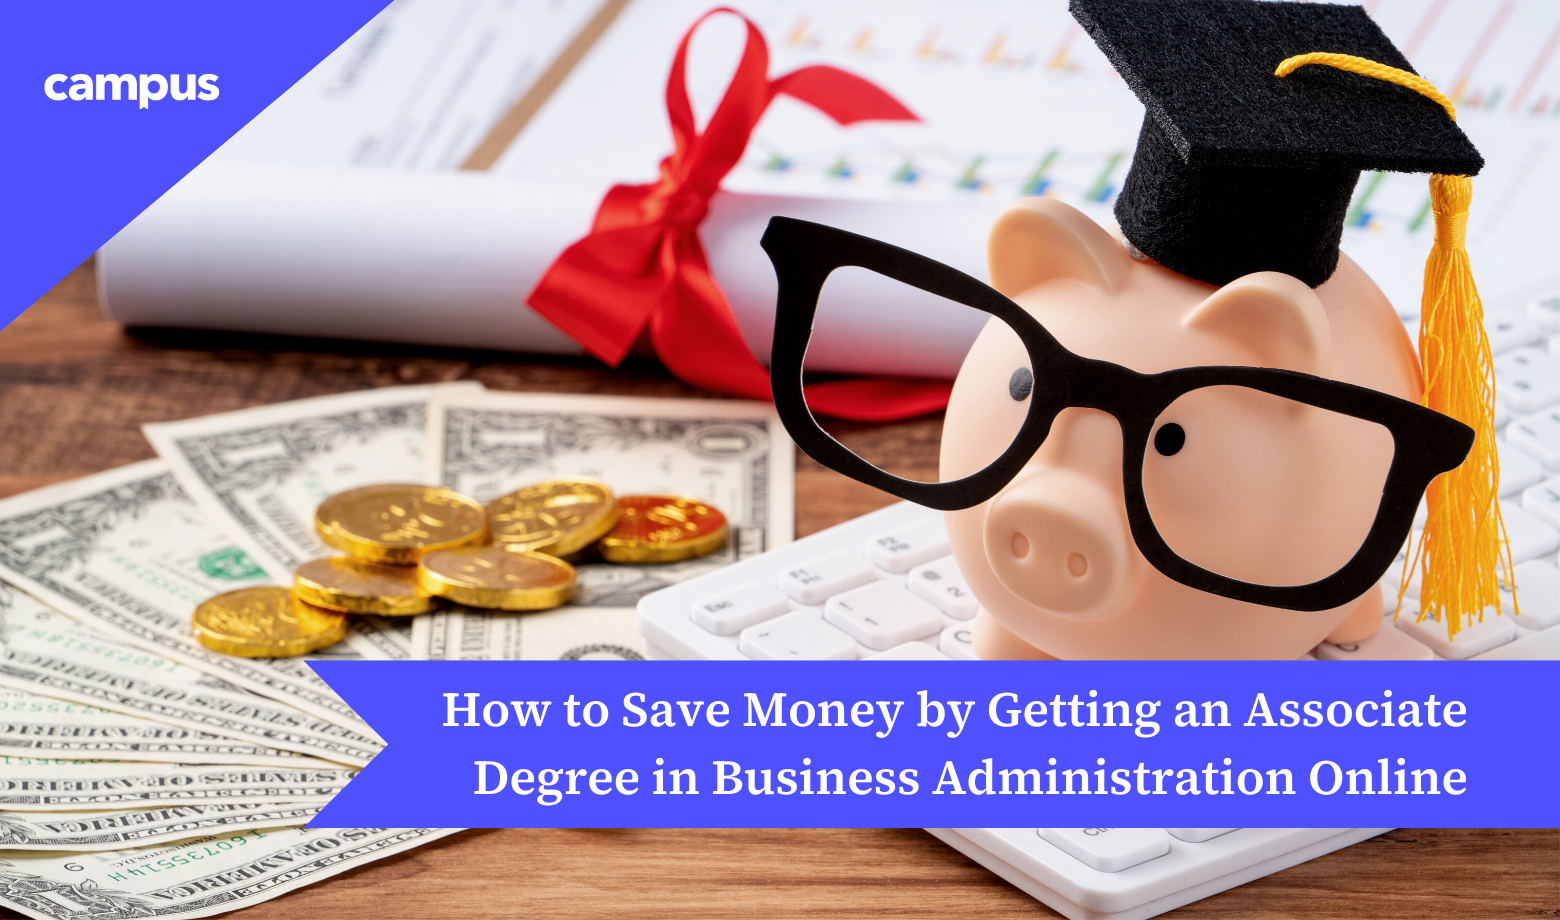 How to Save Money by Getting an Associate Degree in Business Administration Online